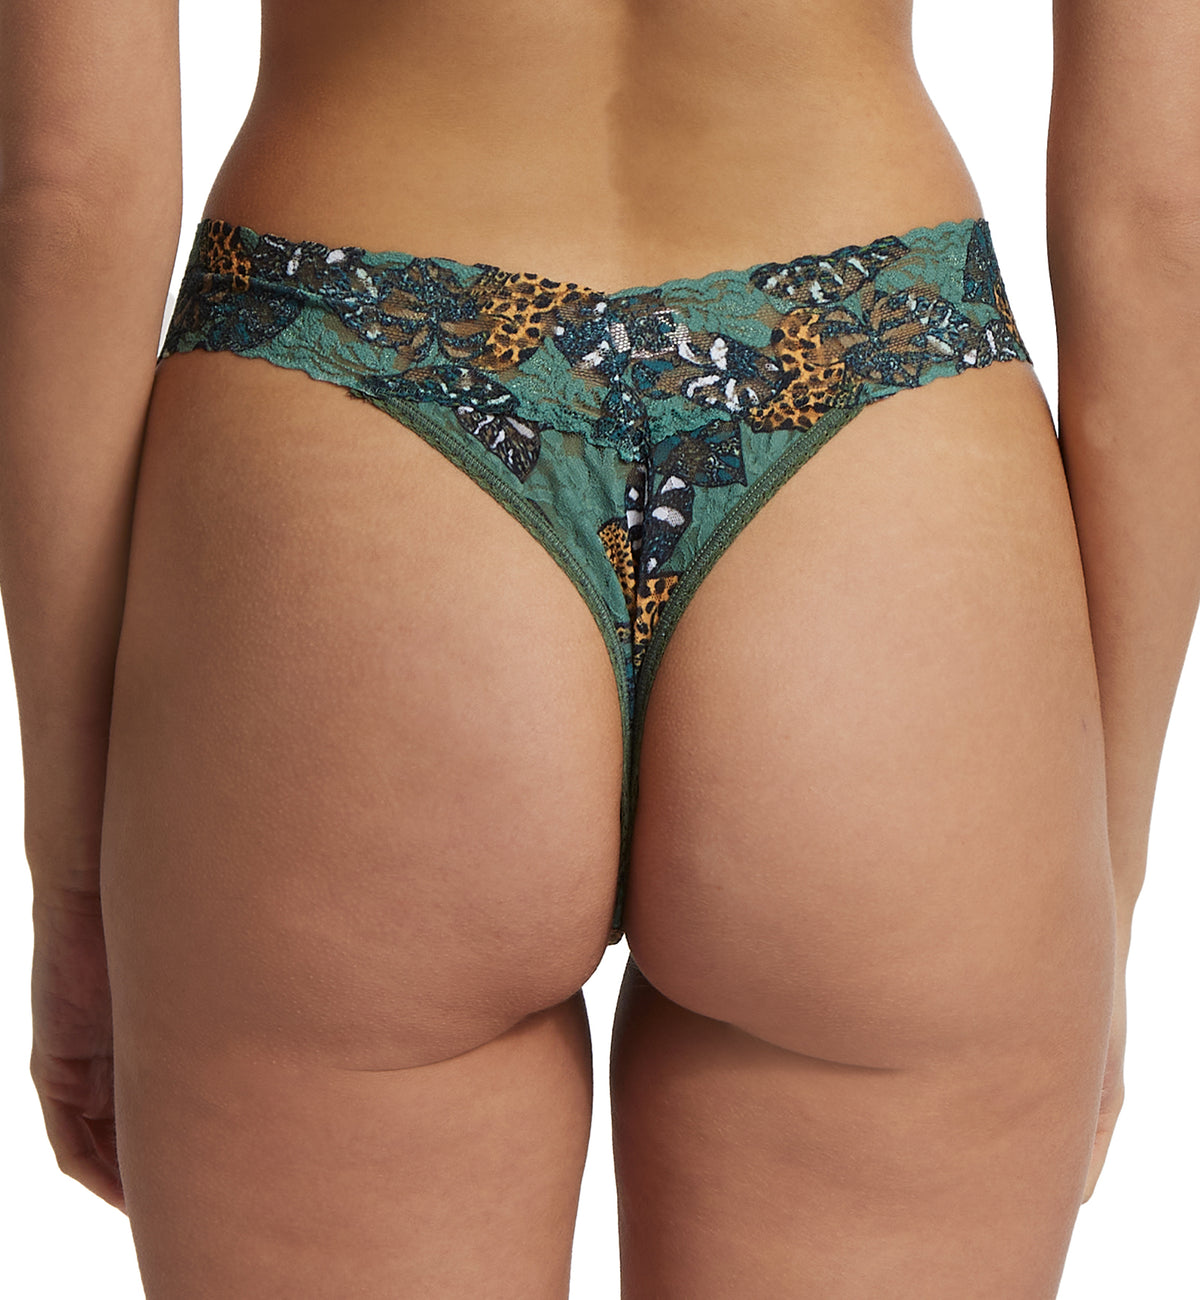 Hanky Panky Signature Lace Printed Original Rise Thong (PR4811P),Prowling - Prowling,One Size